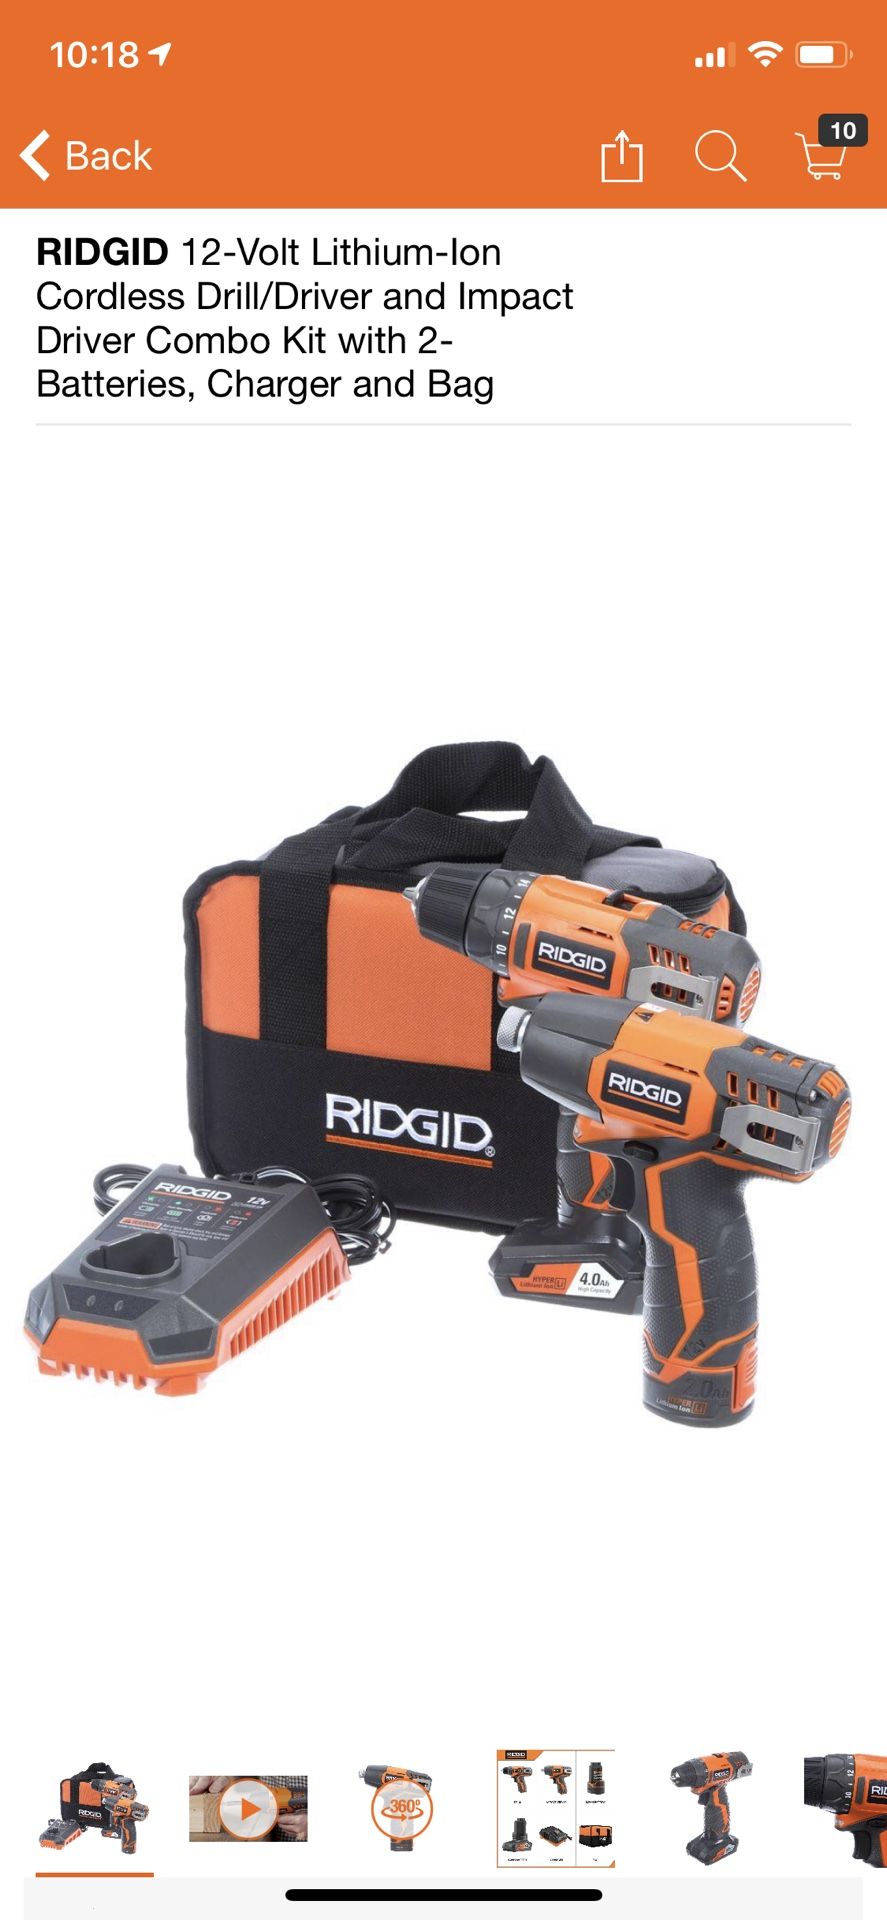 RIDGID 12-Volt Lithium-Ion Cordless Drill/Driver and Impact Driver Combo Kit with 2-Batteries, Charger and Bag